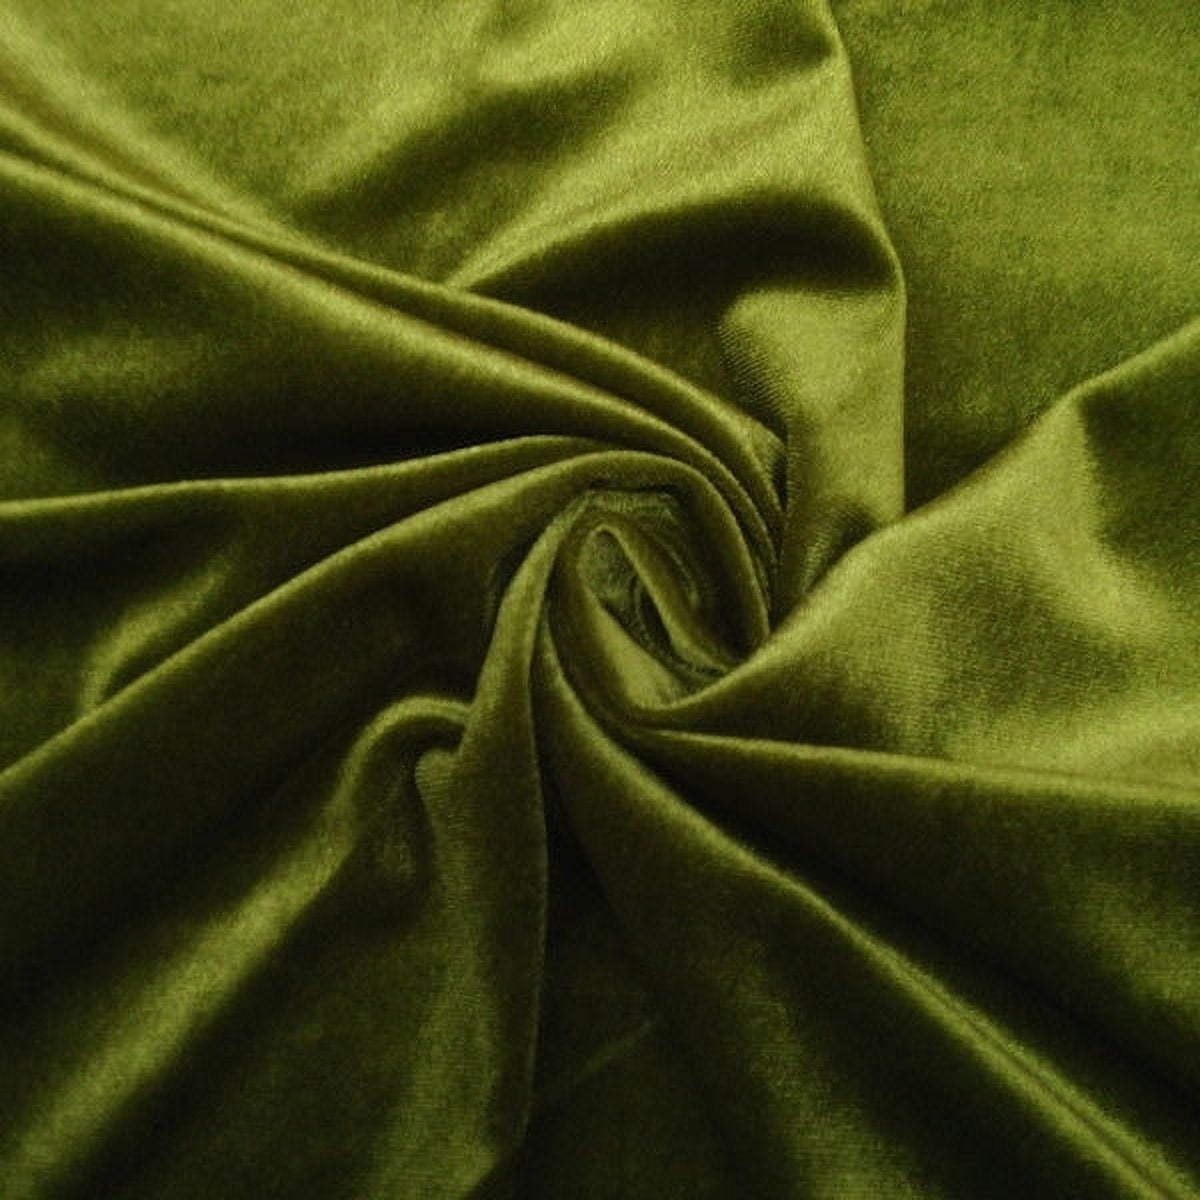 Stretch Velvet Fabric, 58-60" Wide / By The Yard in Many Colors - Free  Shipping